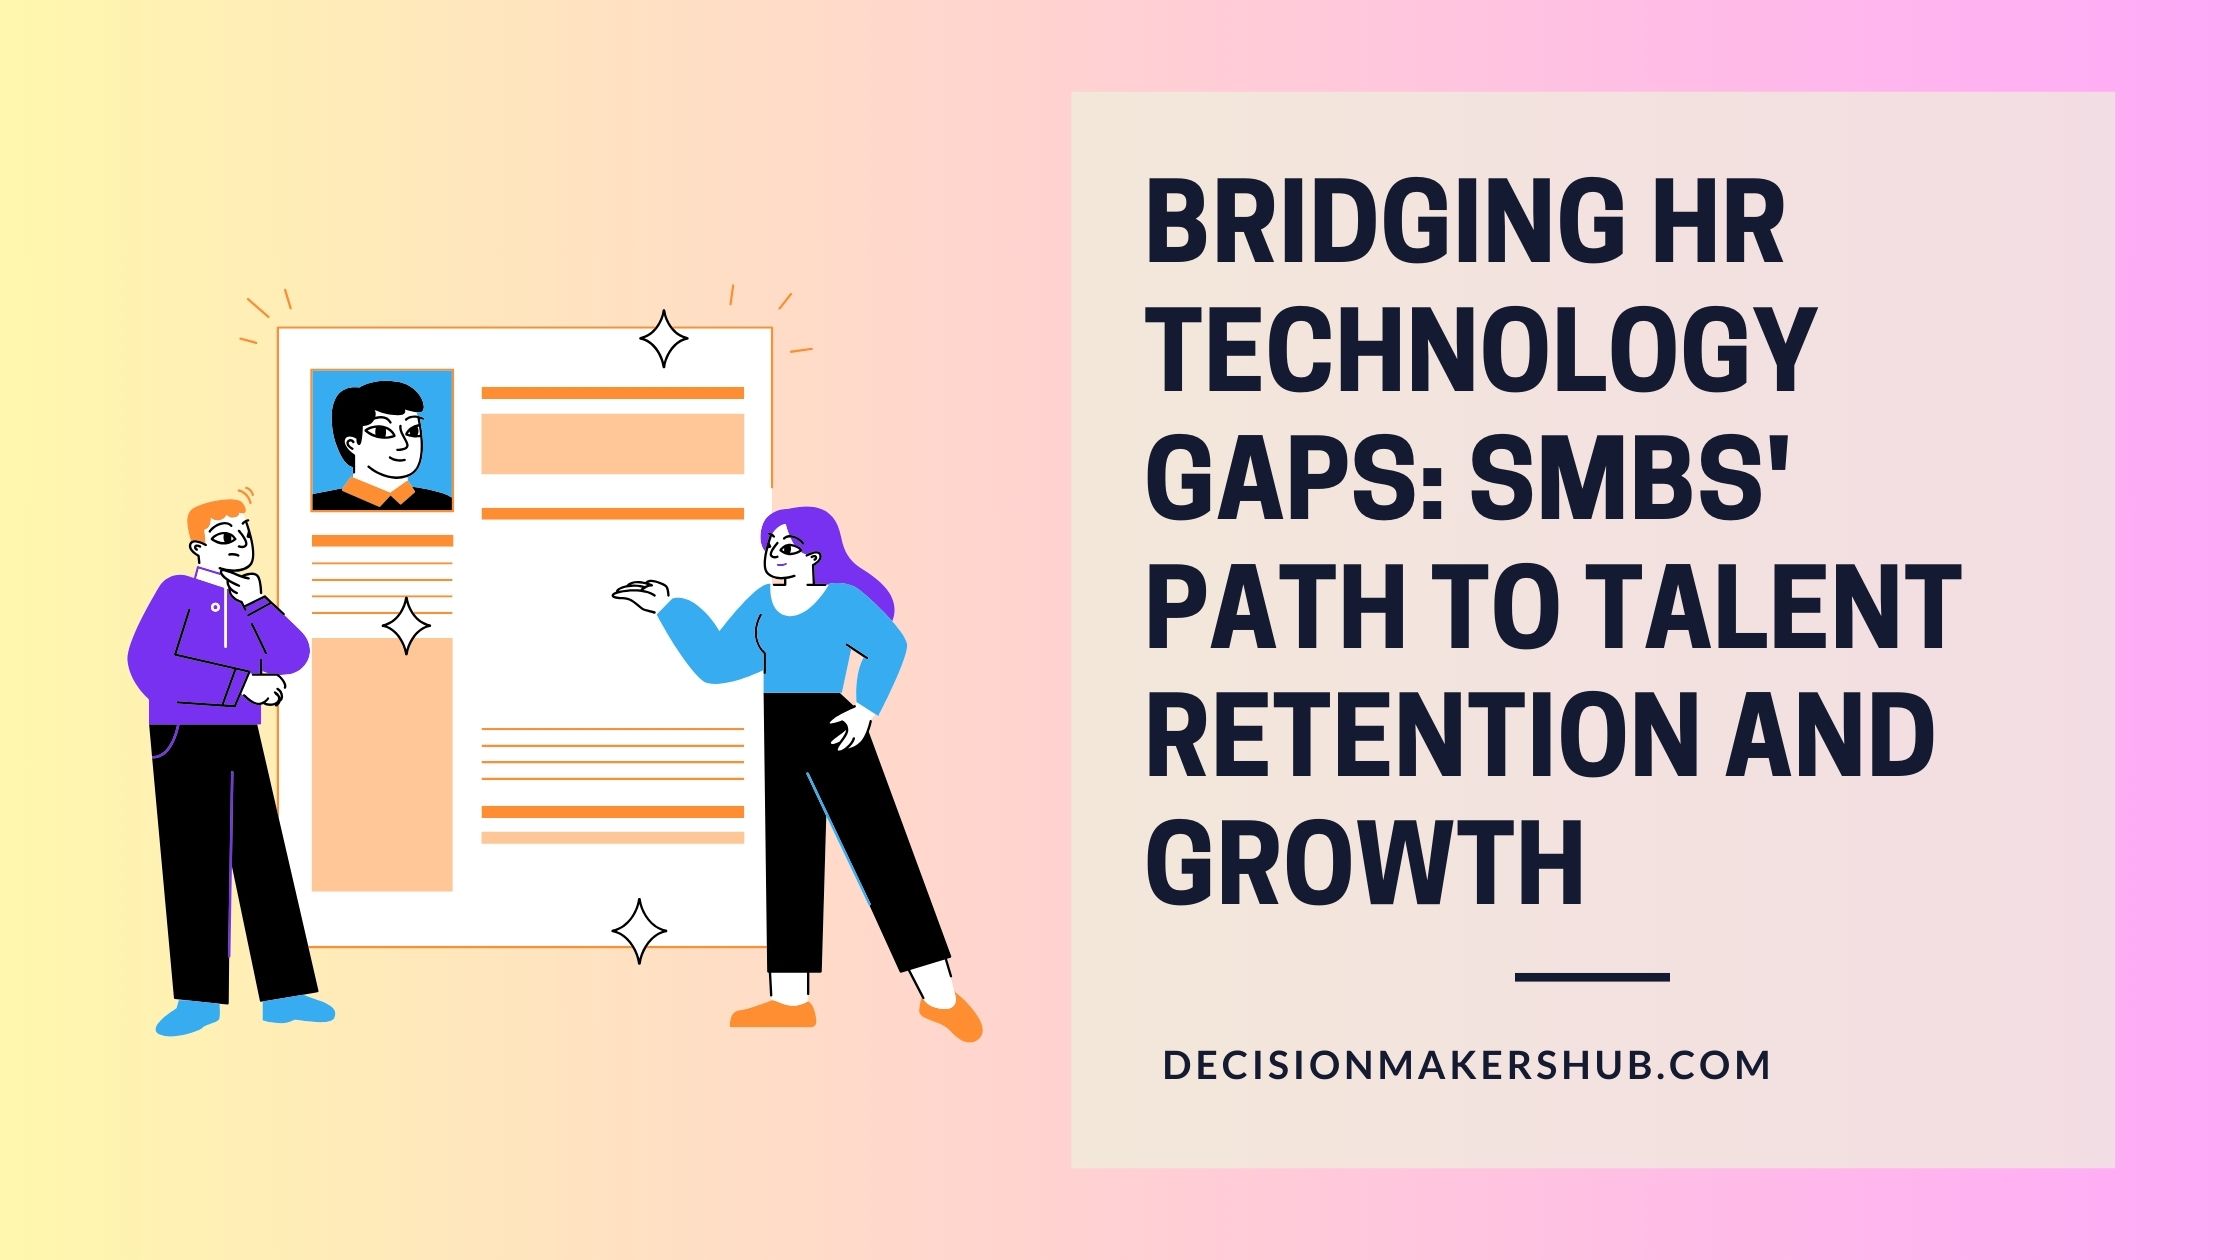 Bridging HR Technology Gaps SMBs' Path to Talent Retention and Growth